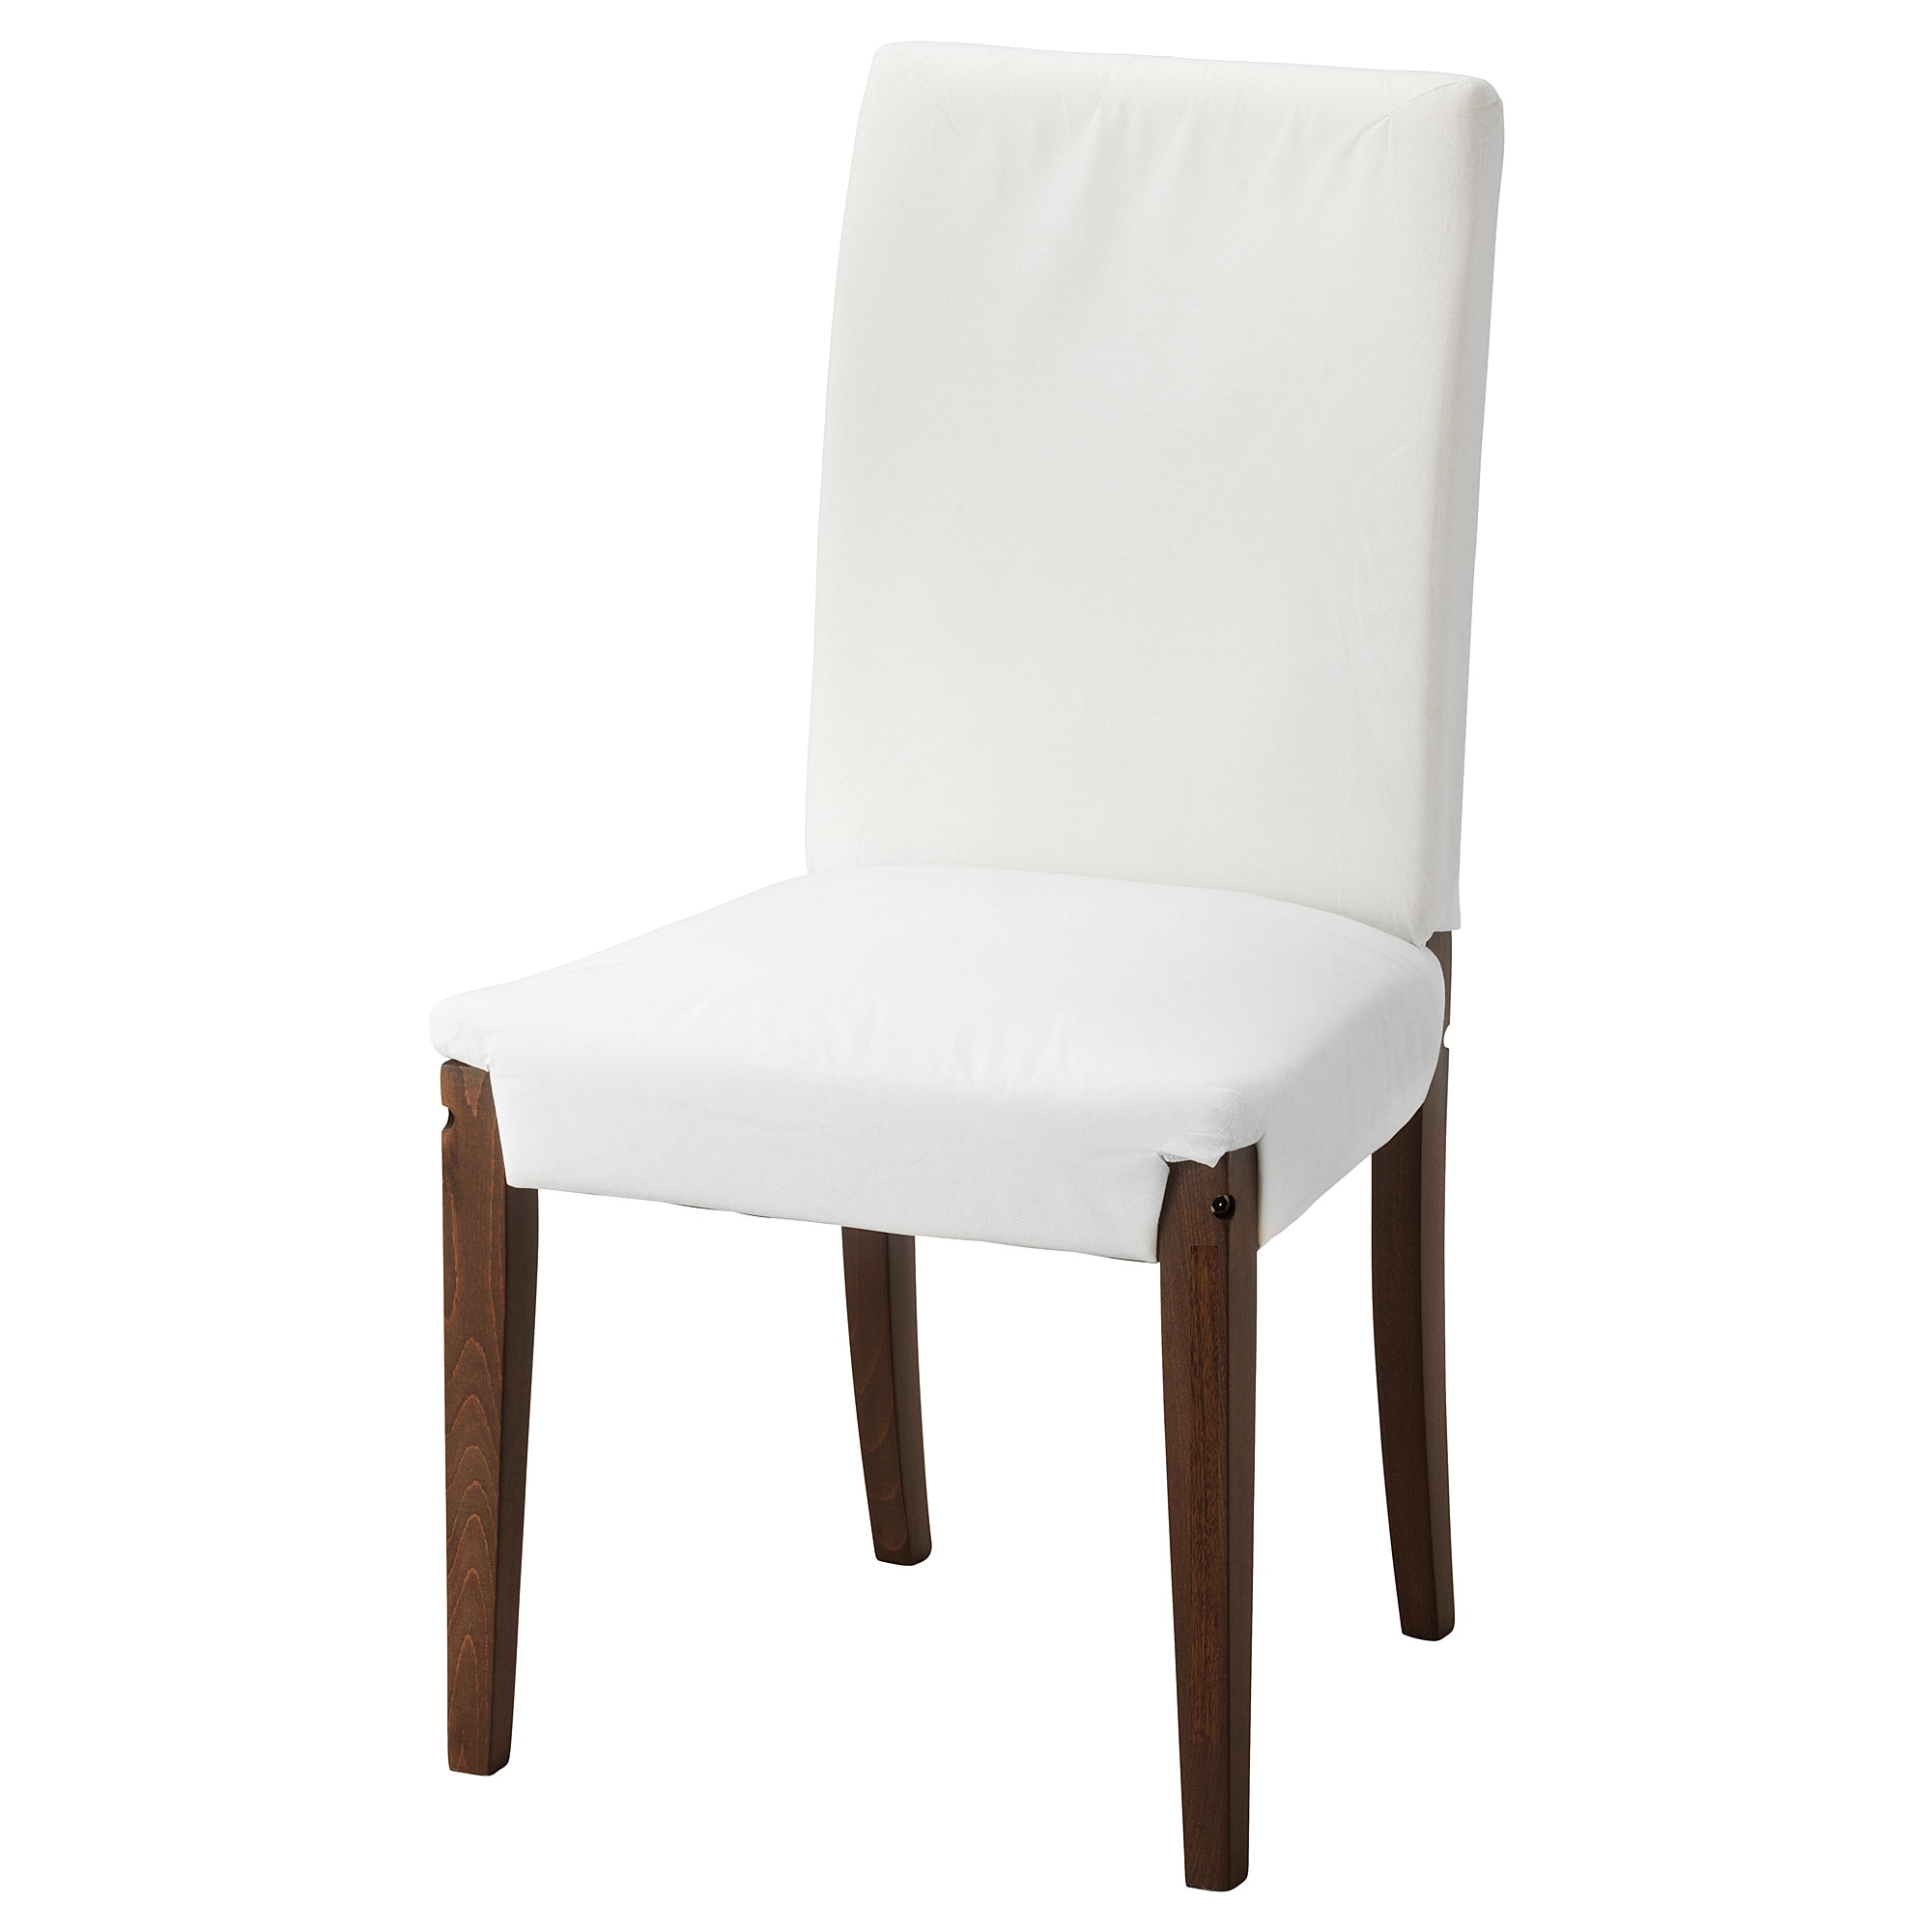 40361033 Henriksdal Dining Chairs IKEA khmer in phnom penh cambodia